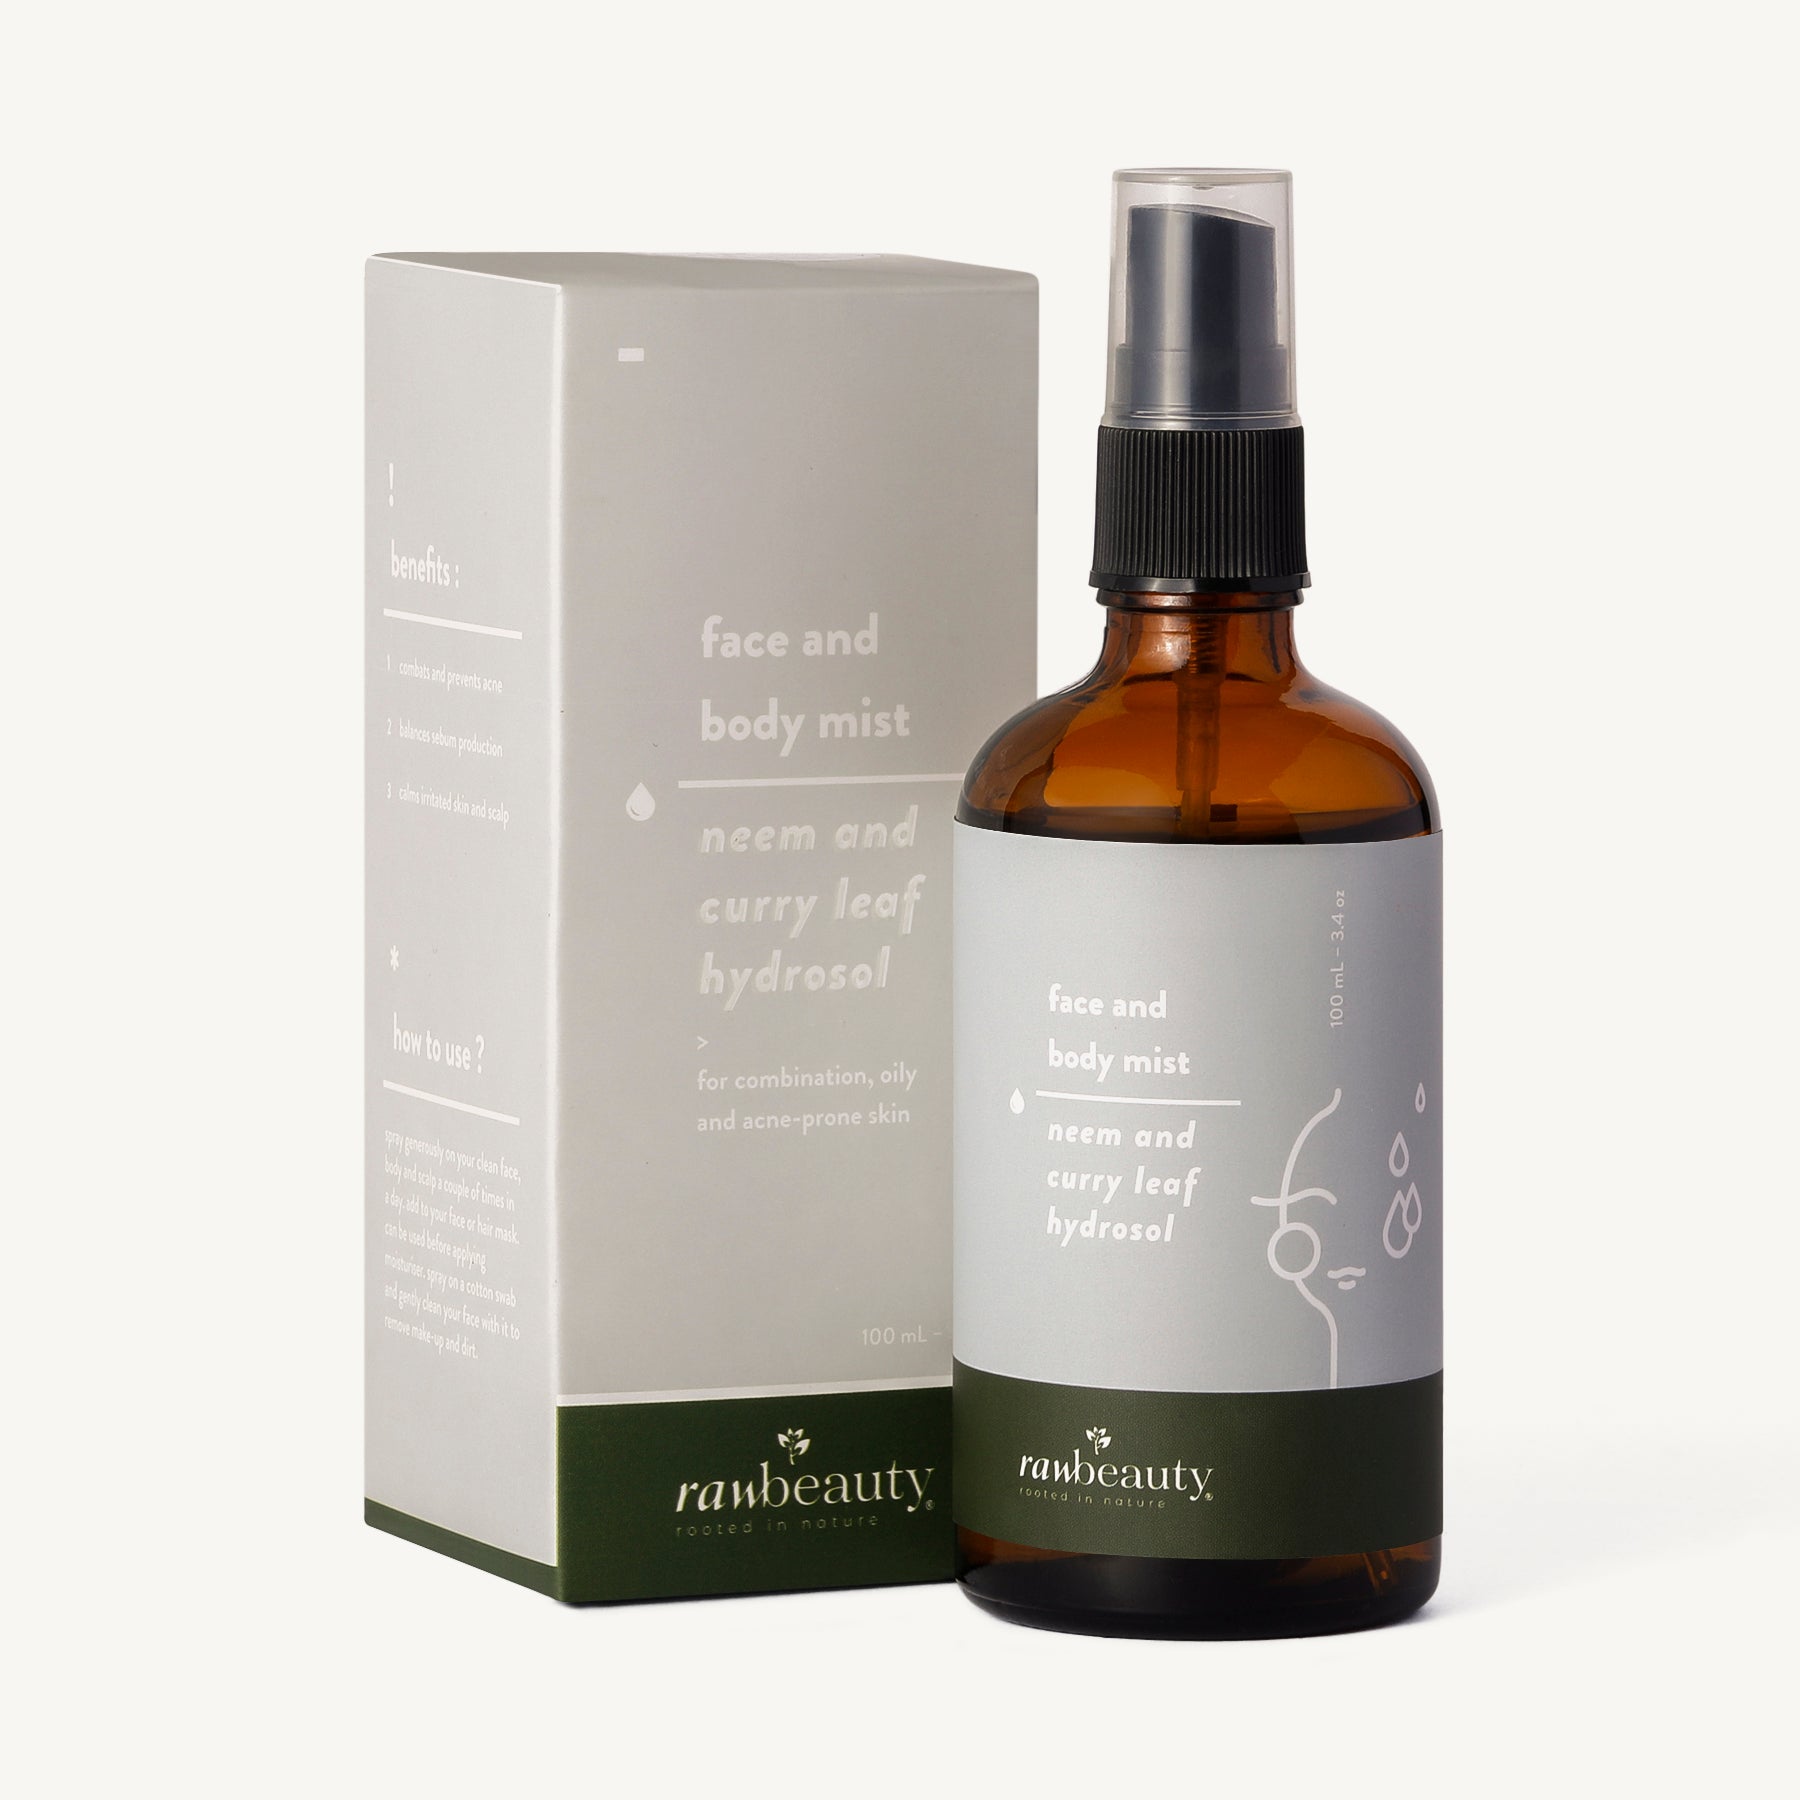 Rawbeauty Wellness Neem and Curry Leaf Hydrosol Face and body mist 100 ml